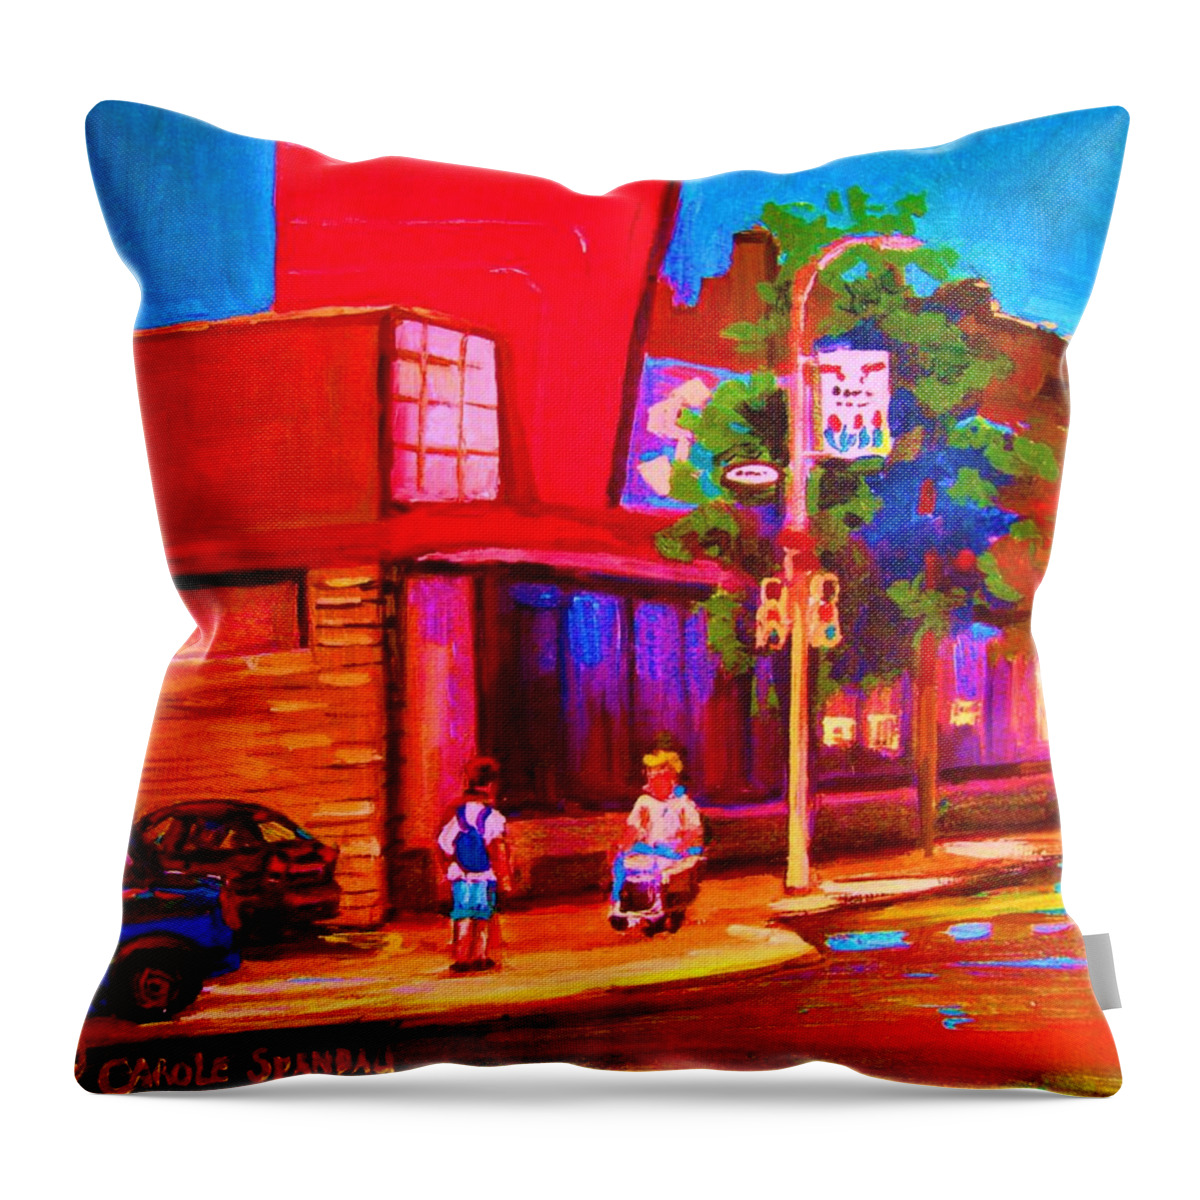 Steinbergs Throw Pillow featuring the painting Steinbergs Supermarket by Carole Spandau